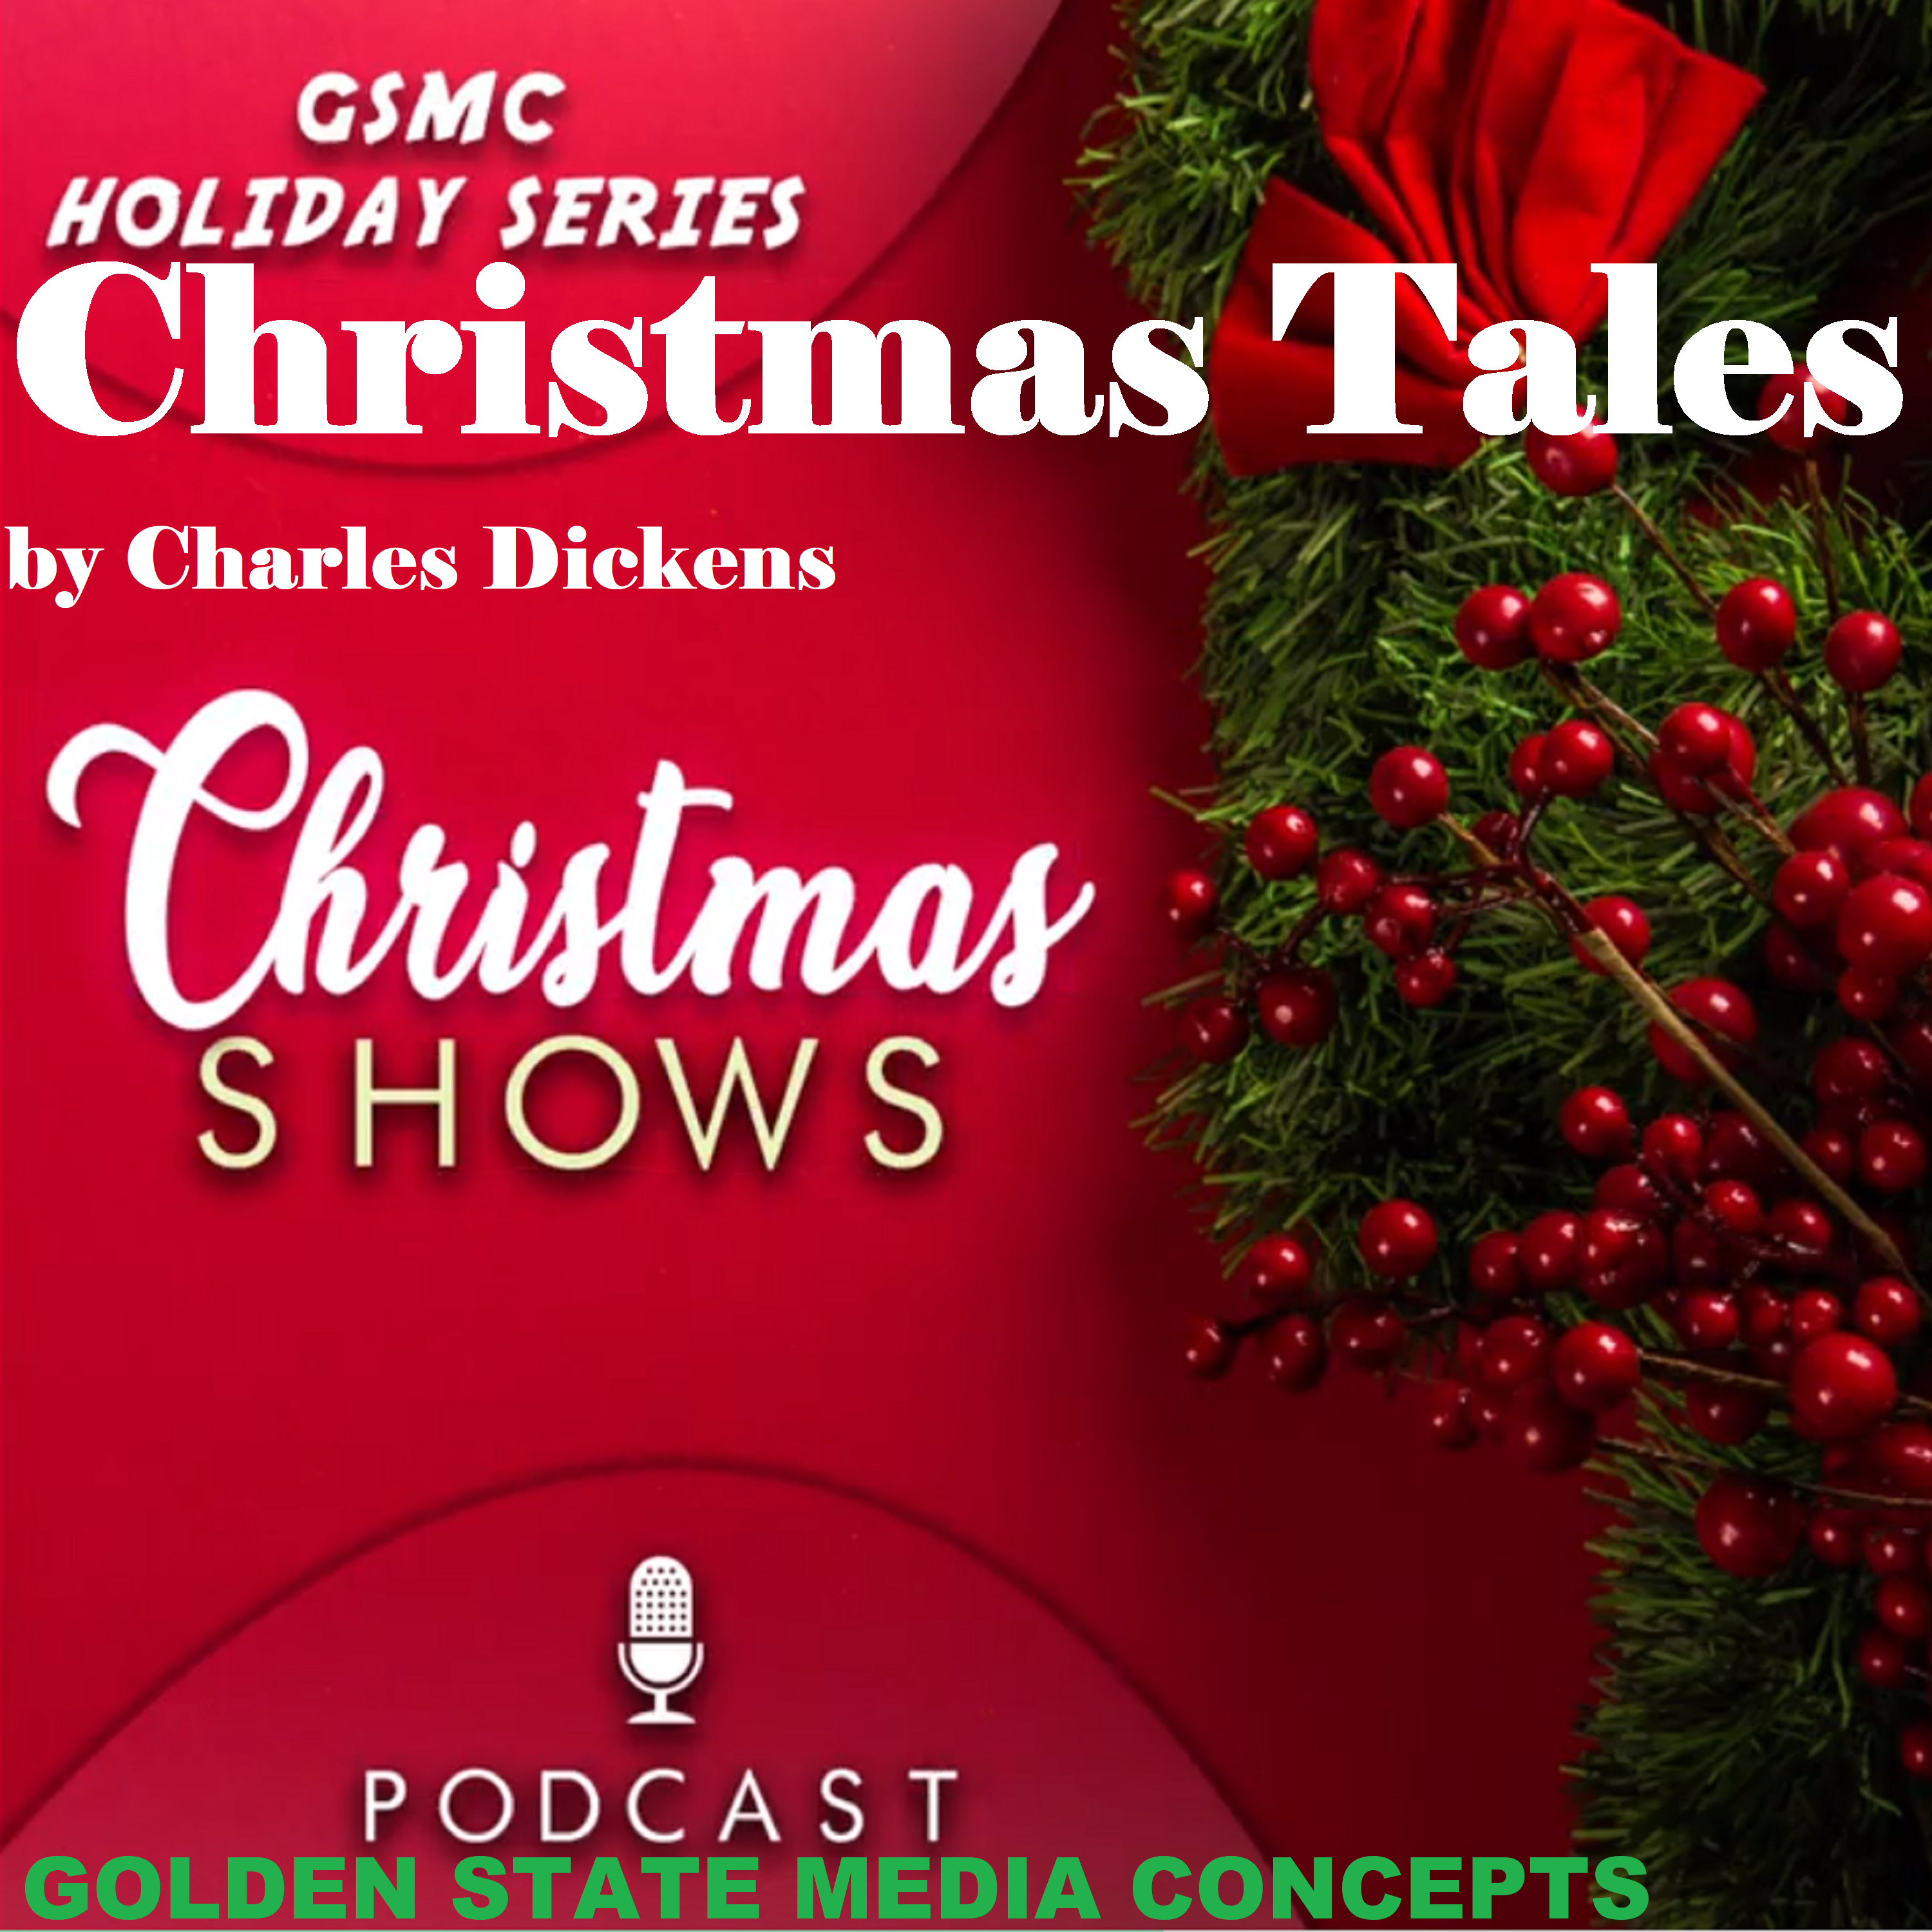 ChristmanTales by Charles Dickens